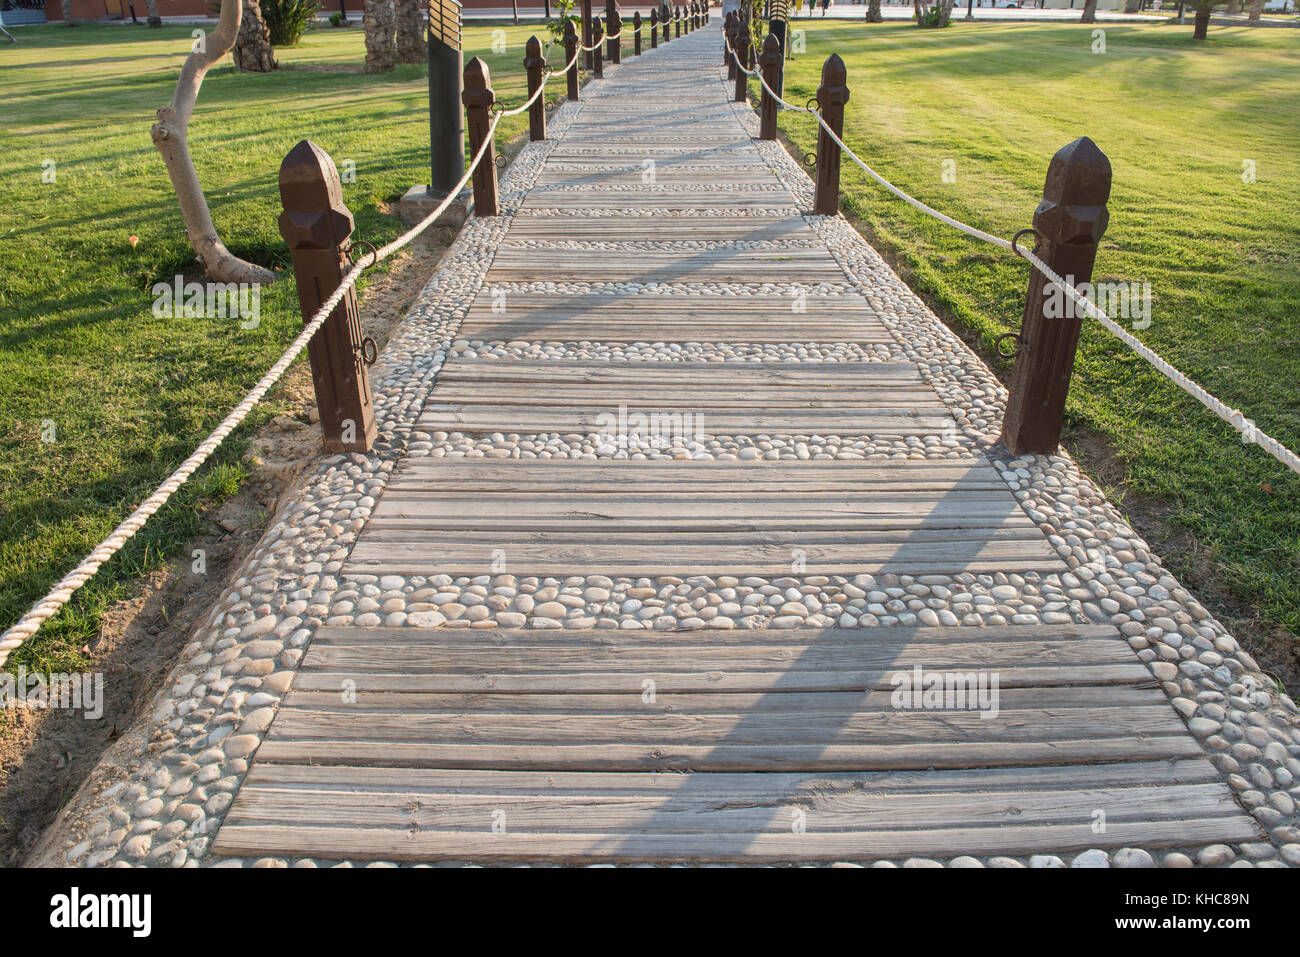 Ornate footpath through formal landscaped gardens with wooden posts in grounds of a luxury tropical hotel resort Stock Photo